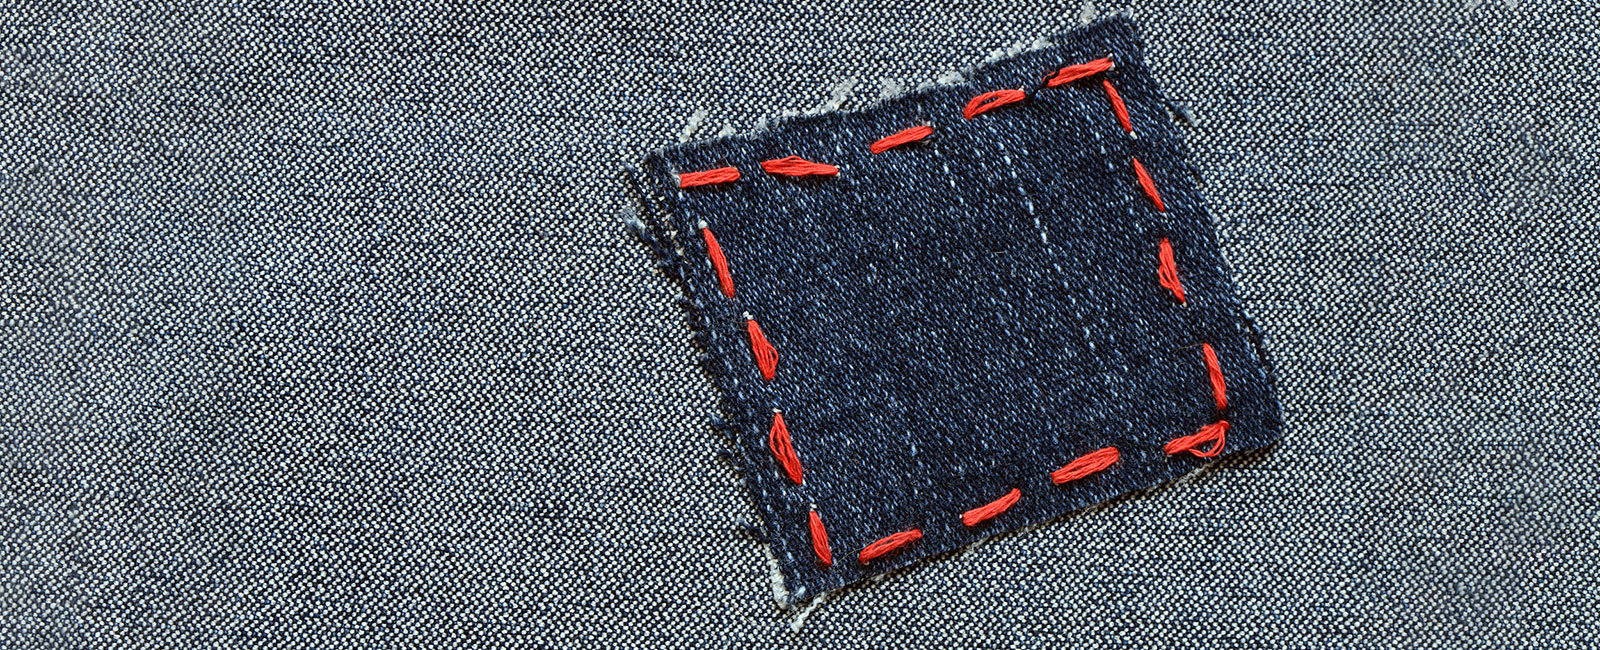 Fabric patch image